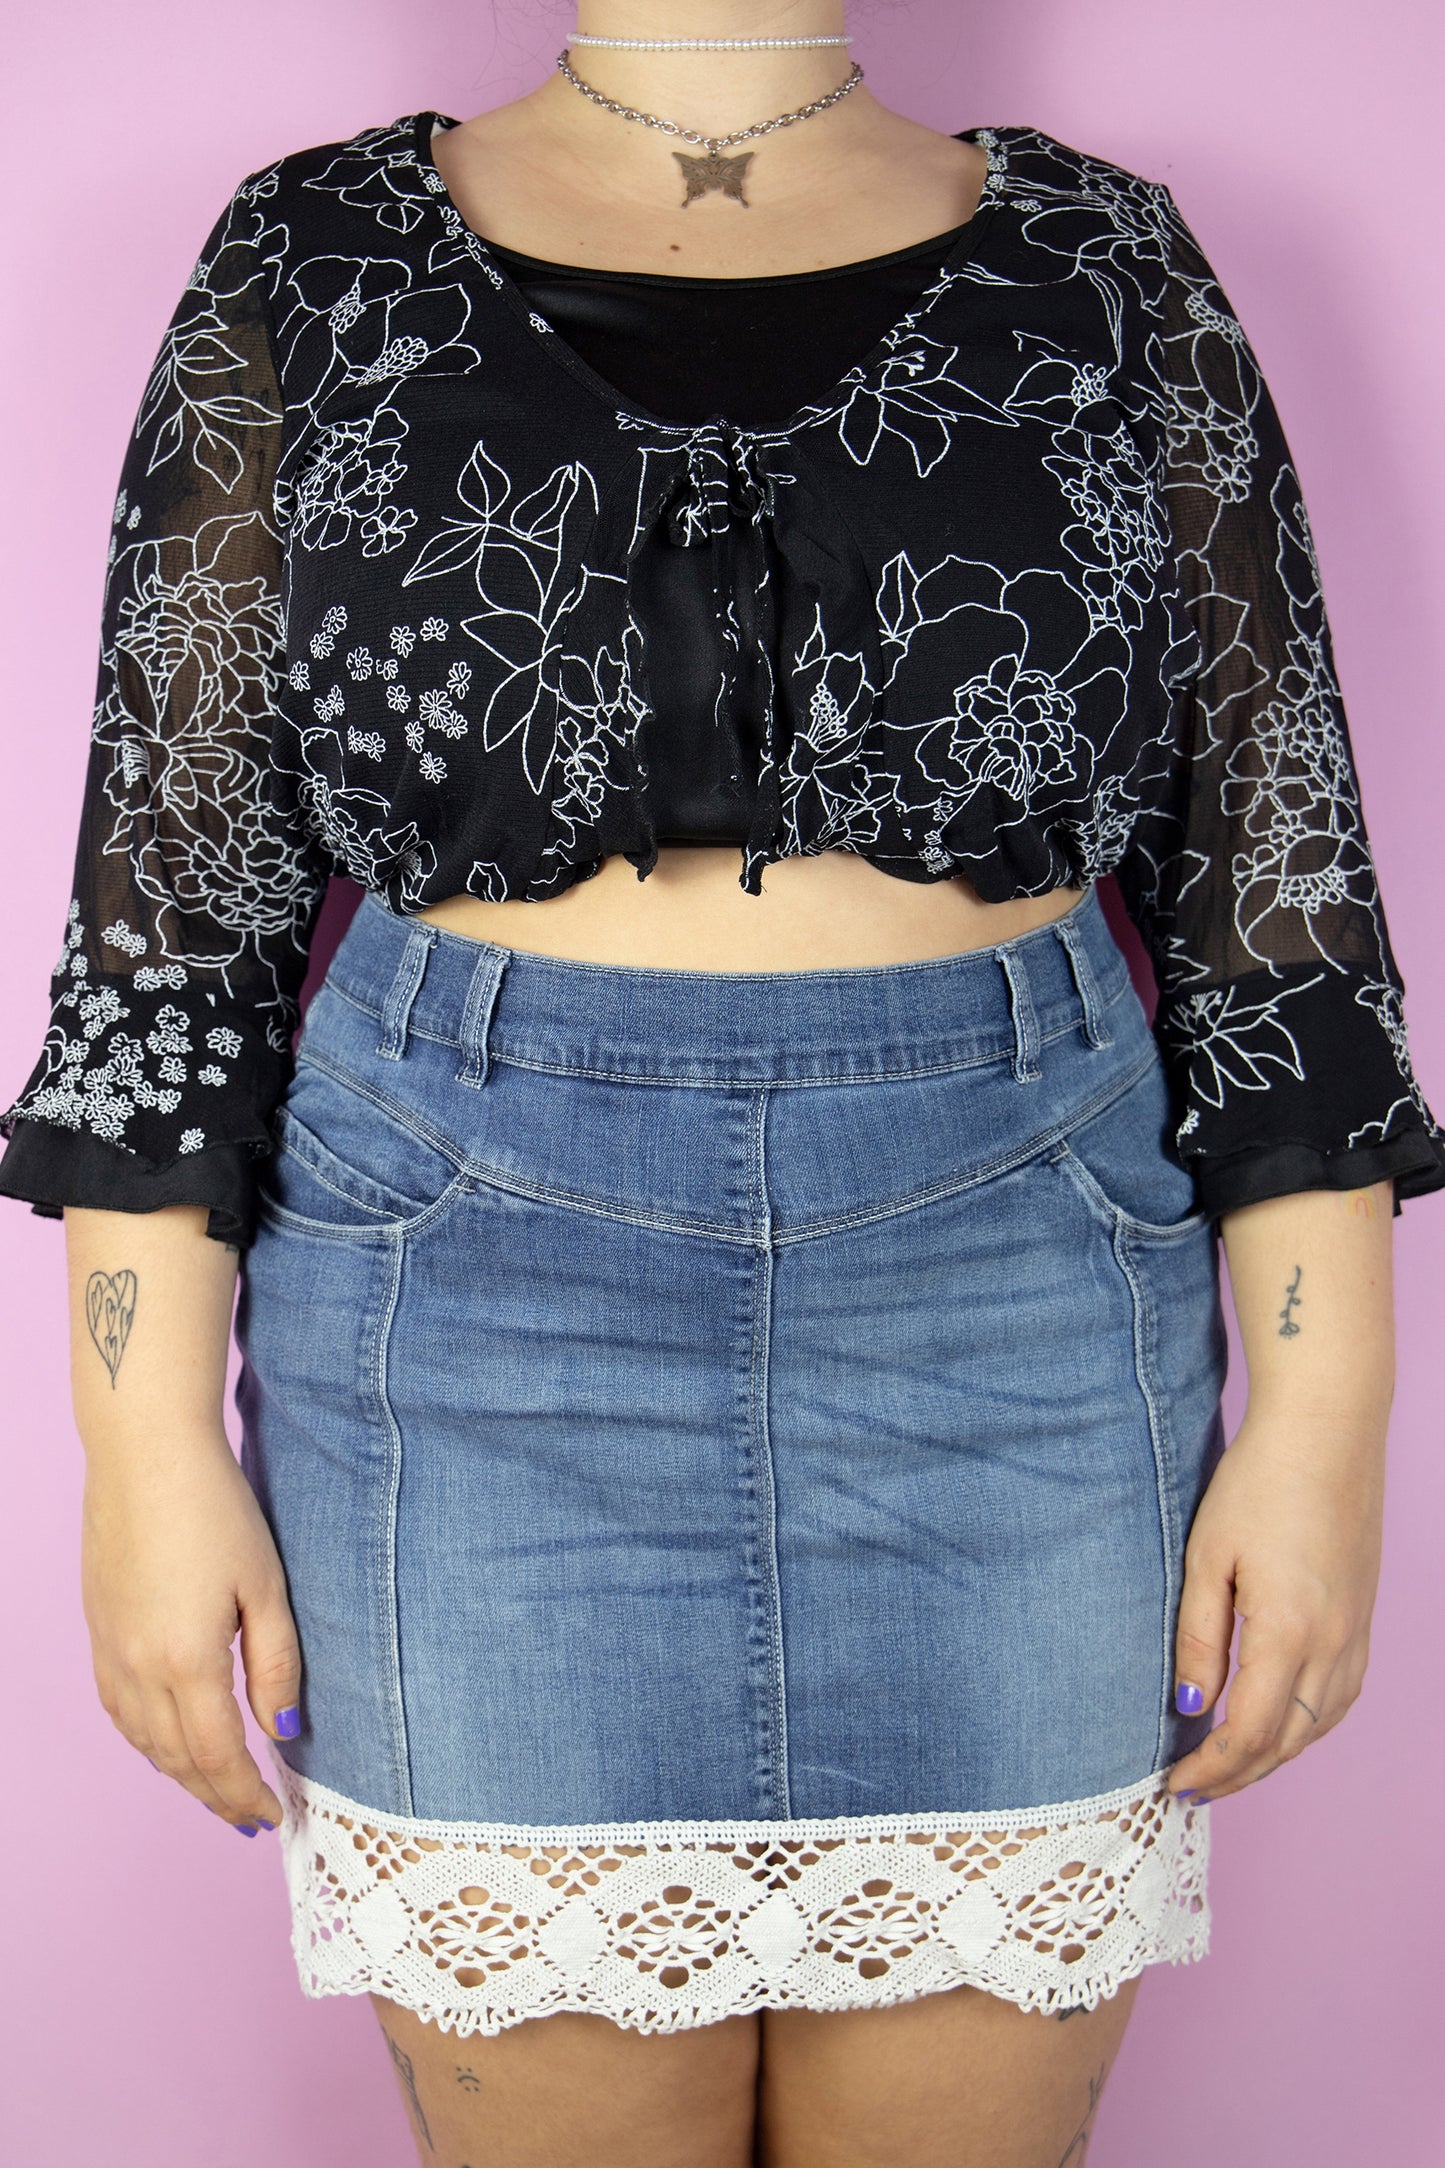 The Y2K Boho Denim Mini Skirt is a vintage stretchy skirt adorned with white crochet lace trim. Cyber 2000s summer jean mini skirt.